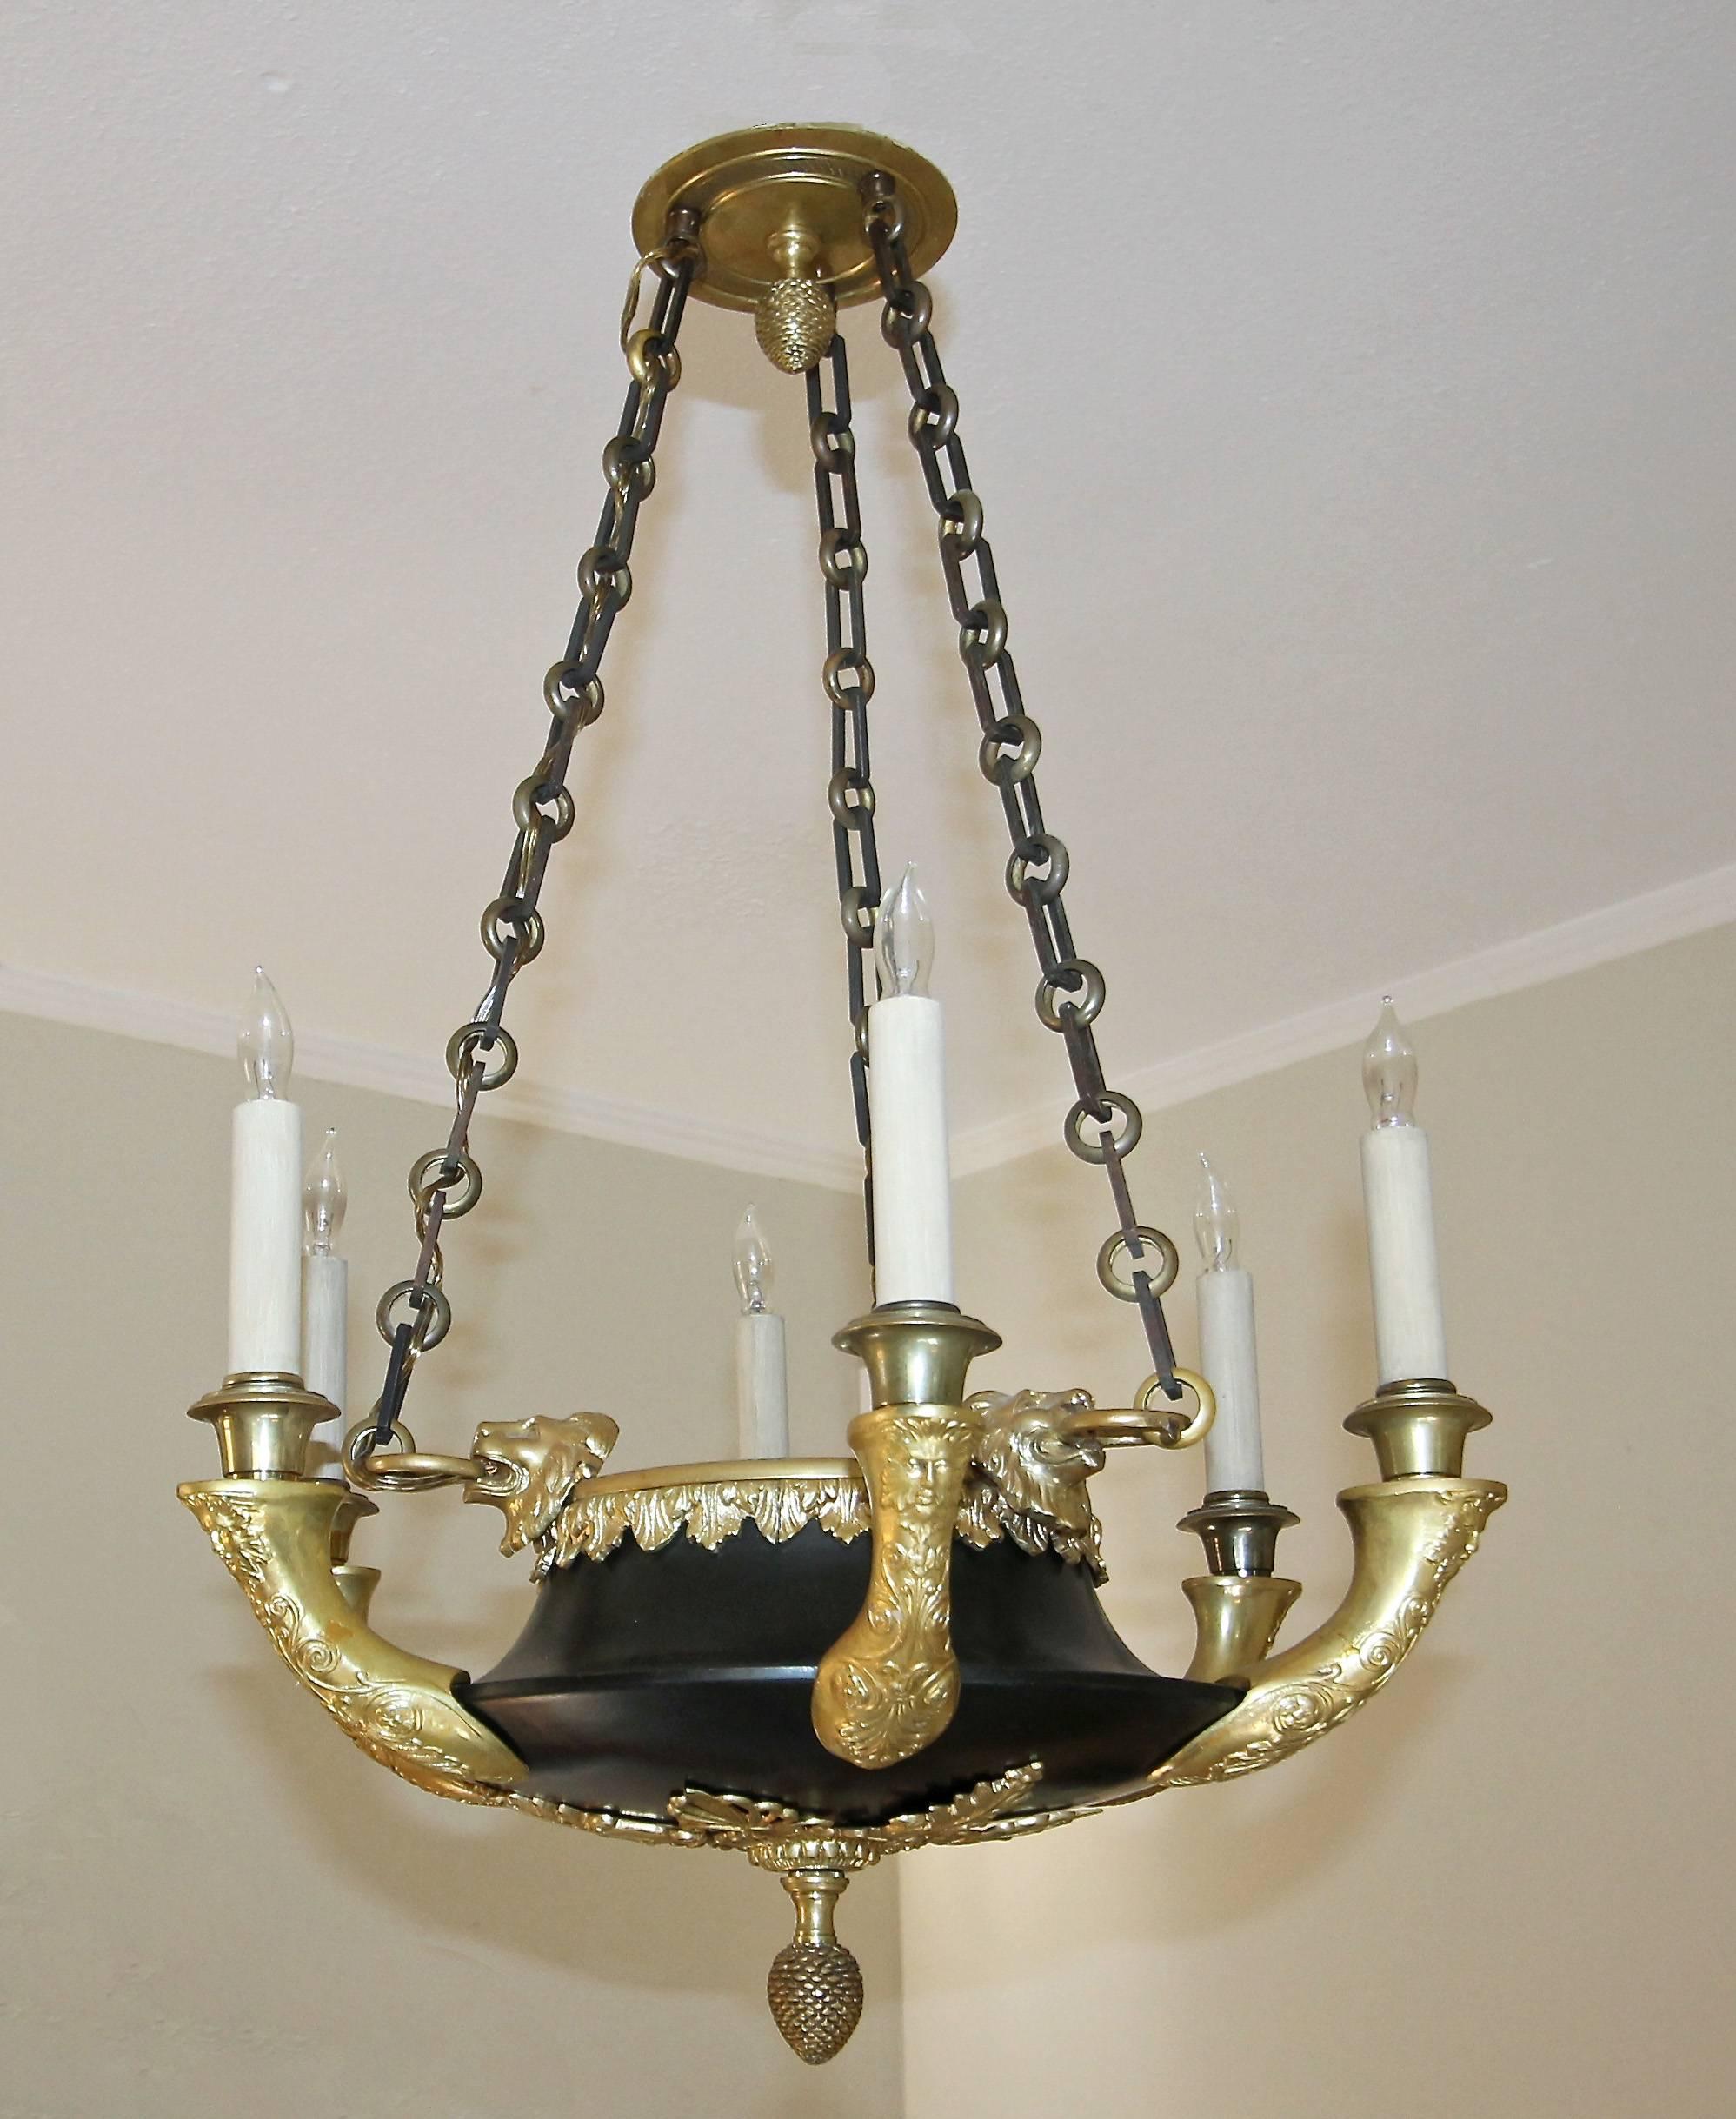 Expertly crafted French late 19th century six-light chandelier in the Empire style decorated with rich detailed neoclassical ornamentation with lion heads, figural satyres mask, palm leaves and pine cone finials. Gilt bronze and tole. Extremely